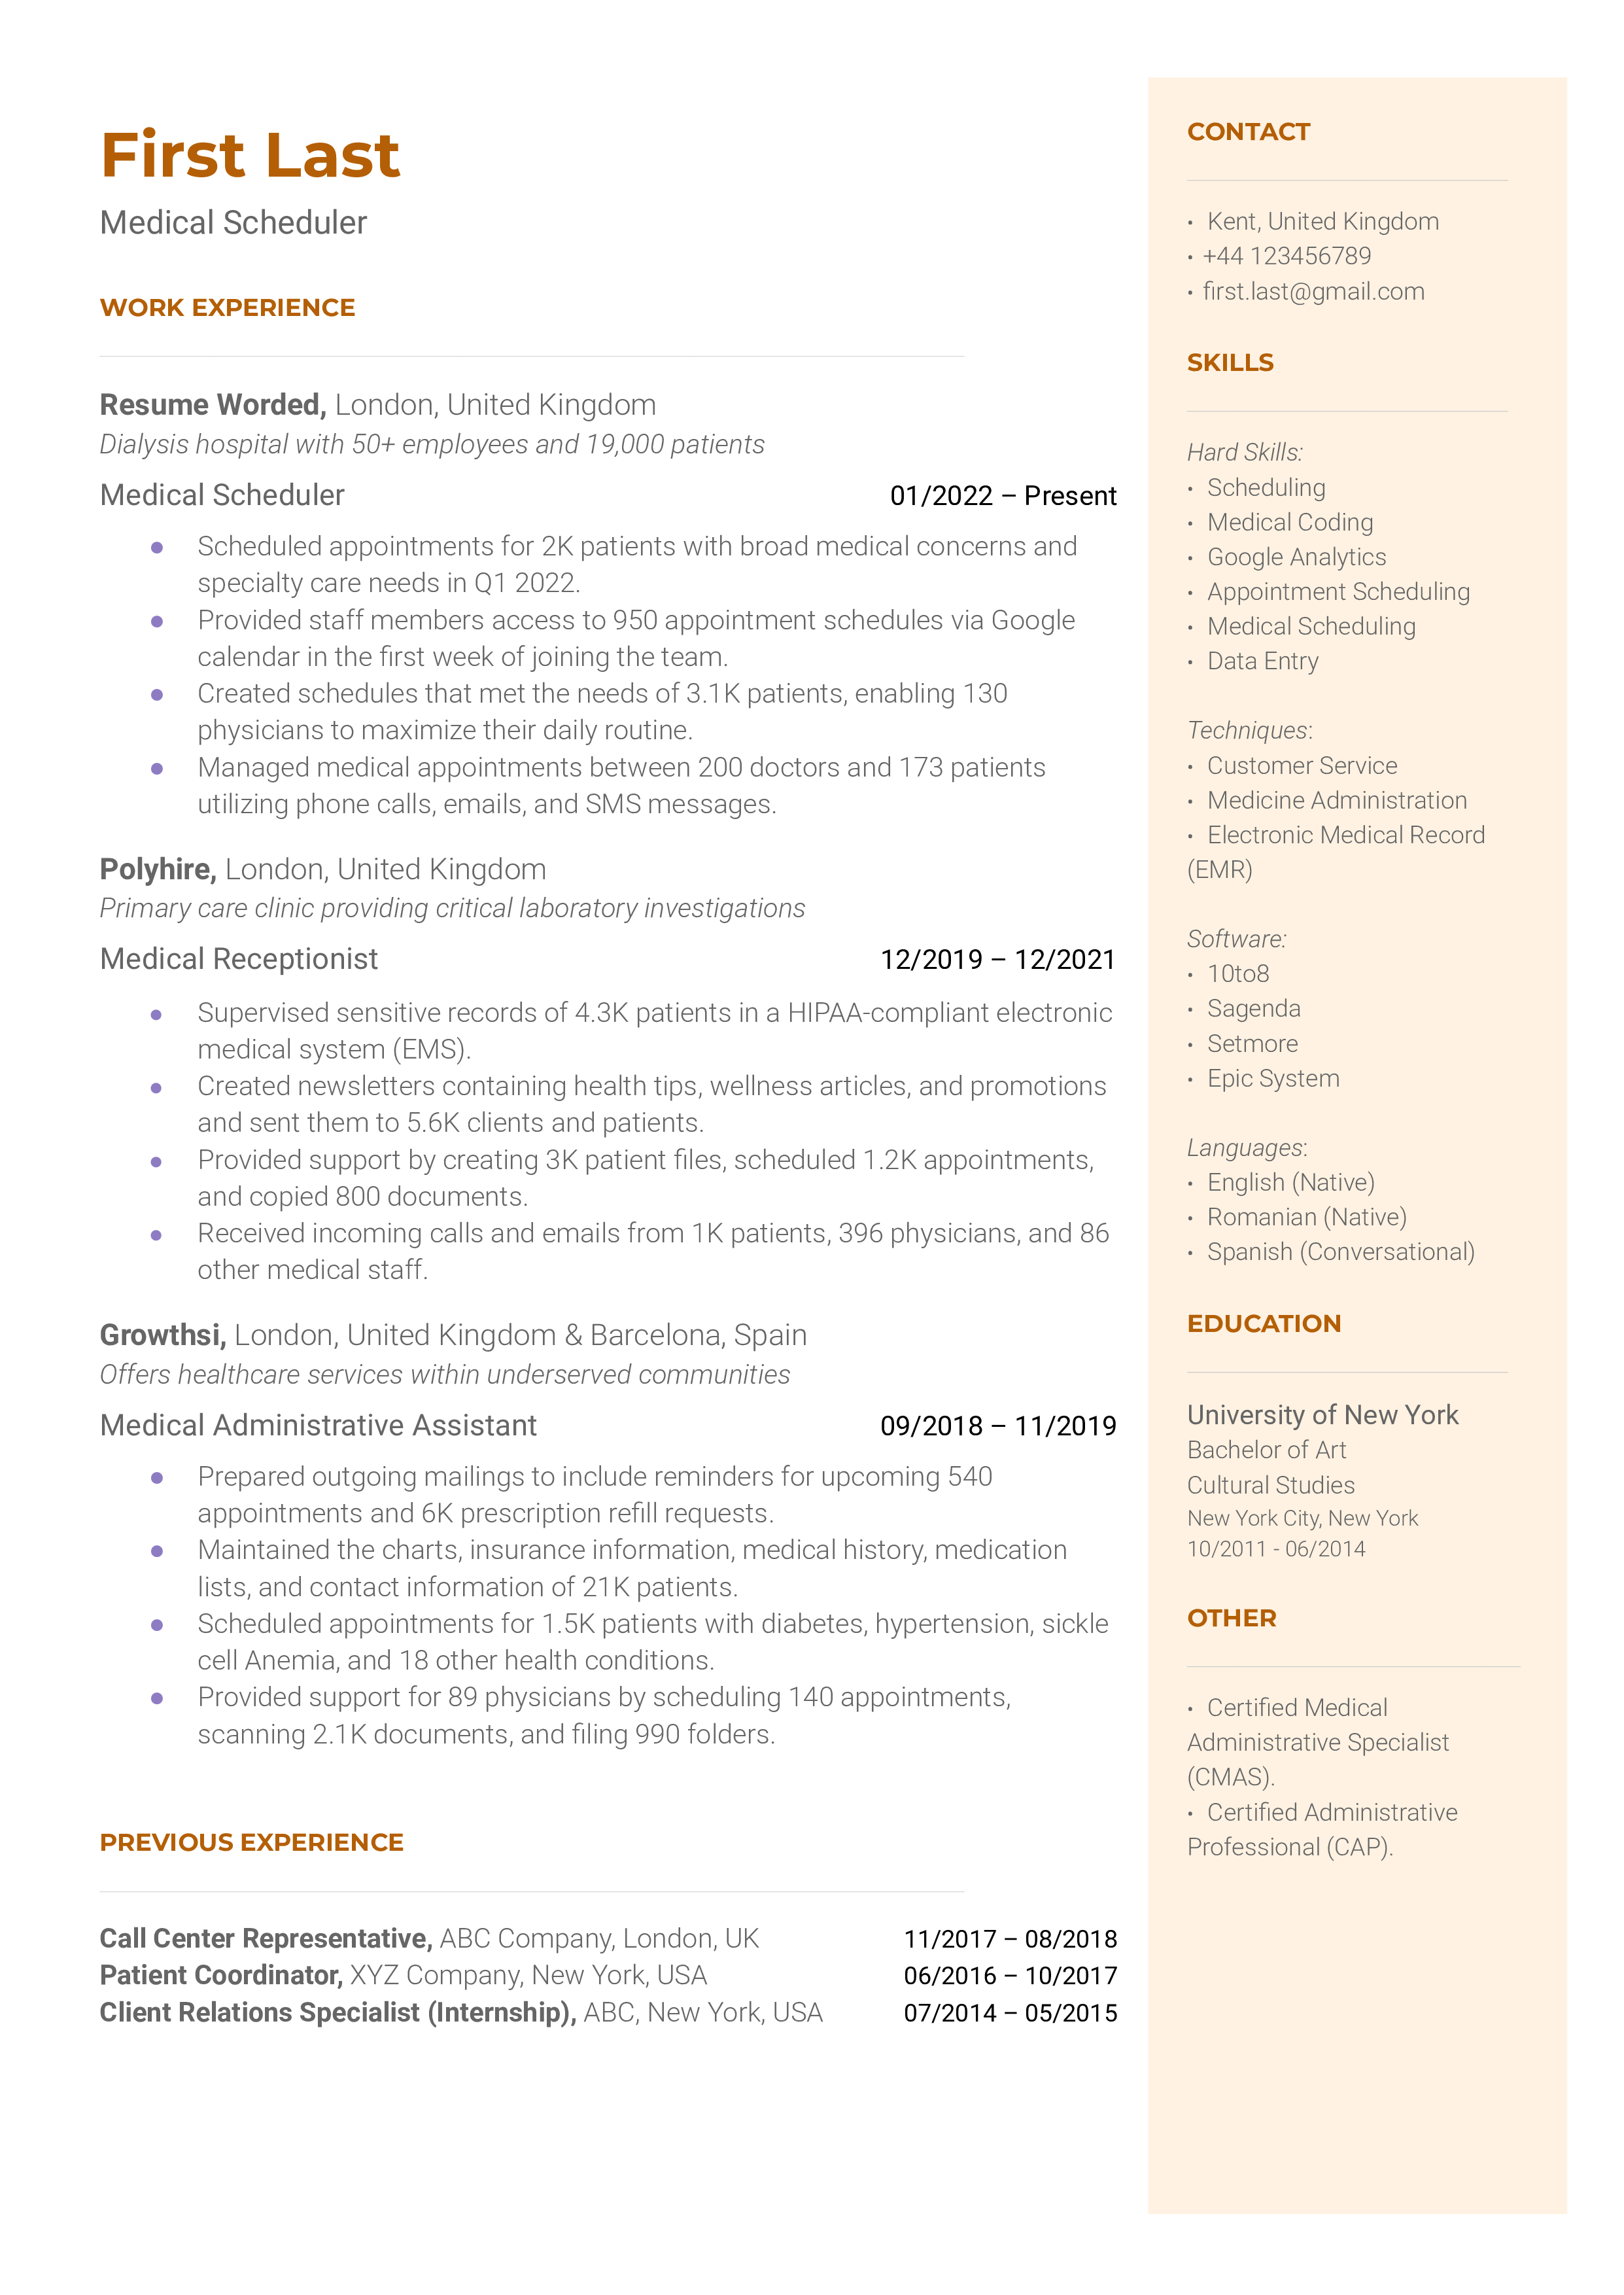 A medical scheduler resume template including strong action verbs